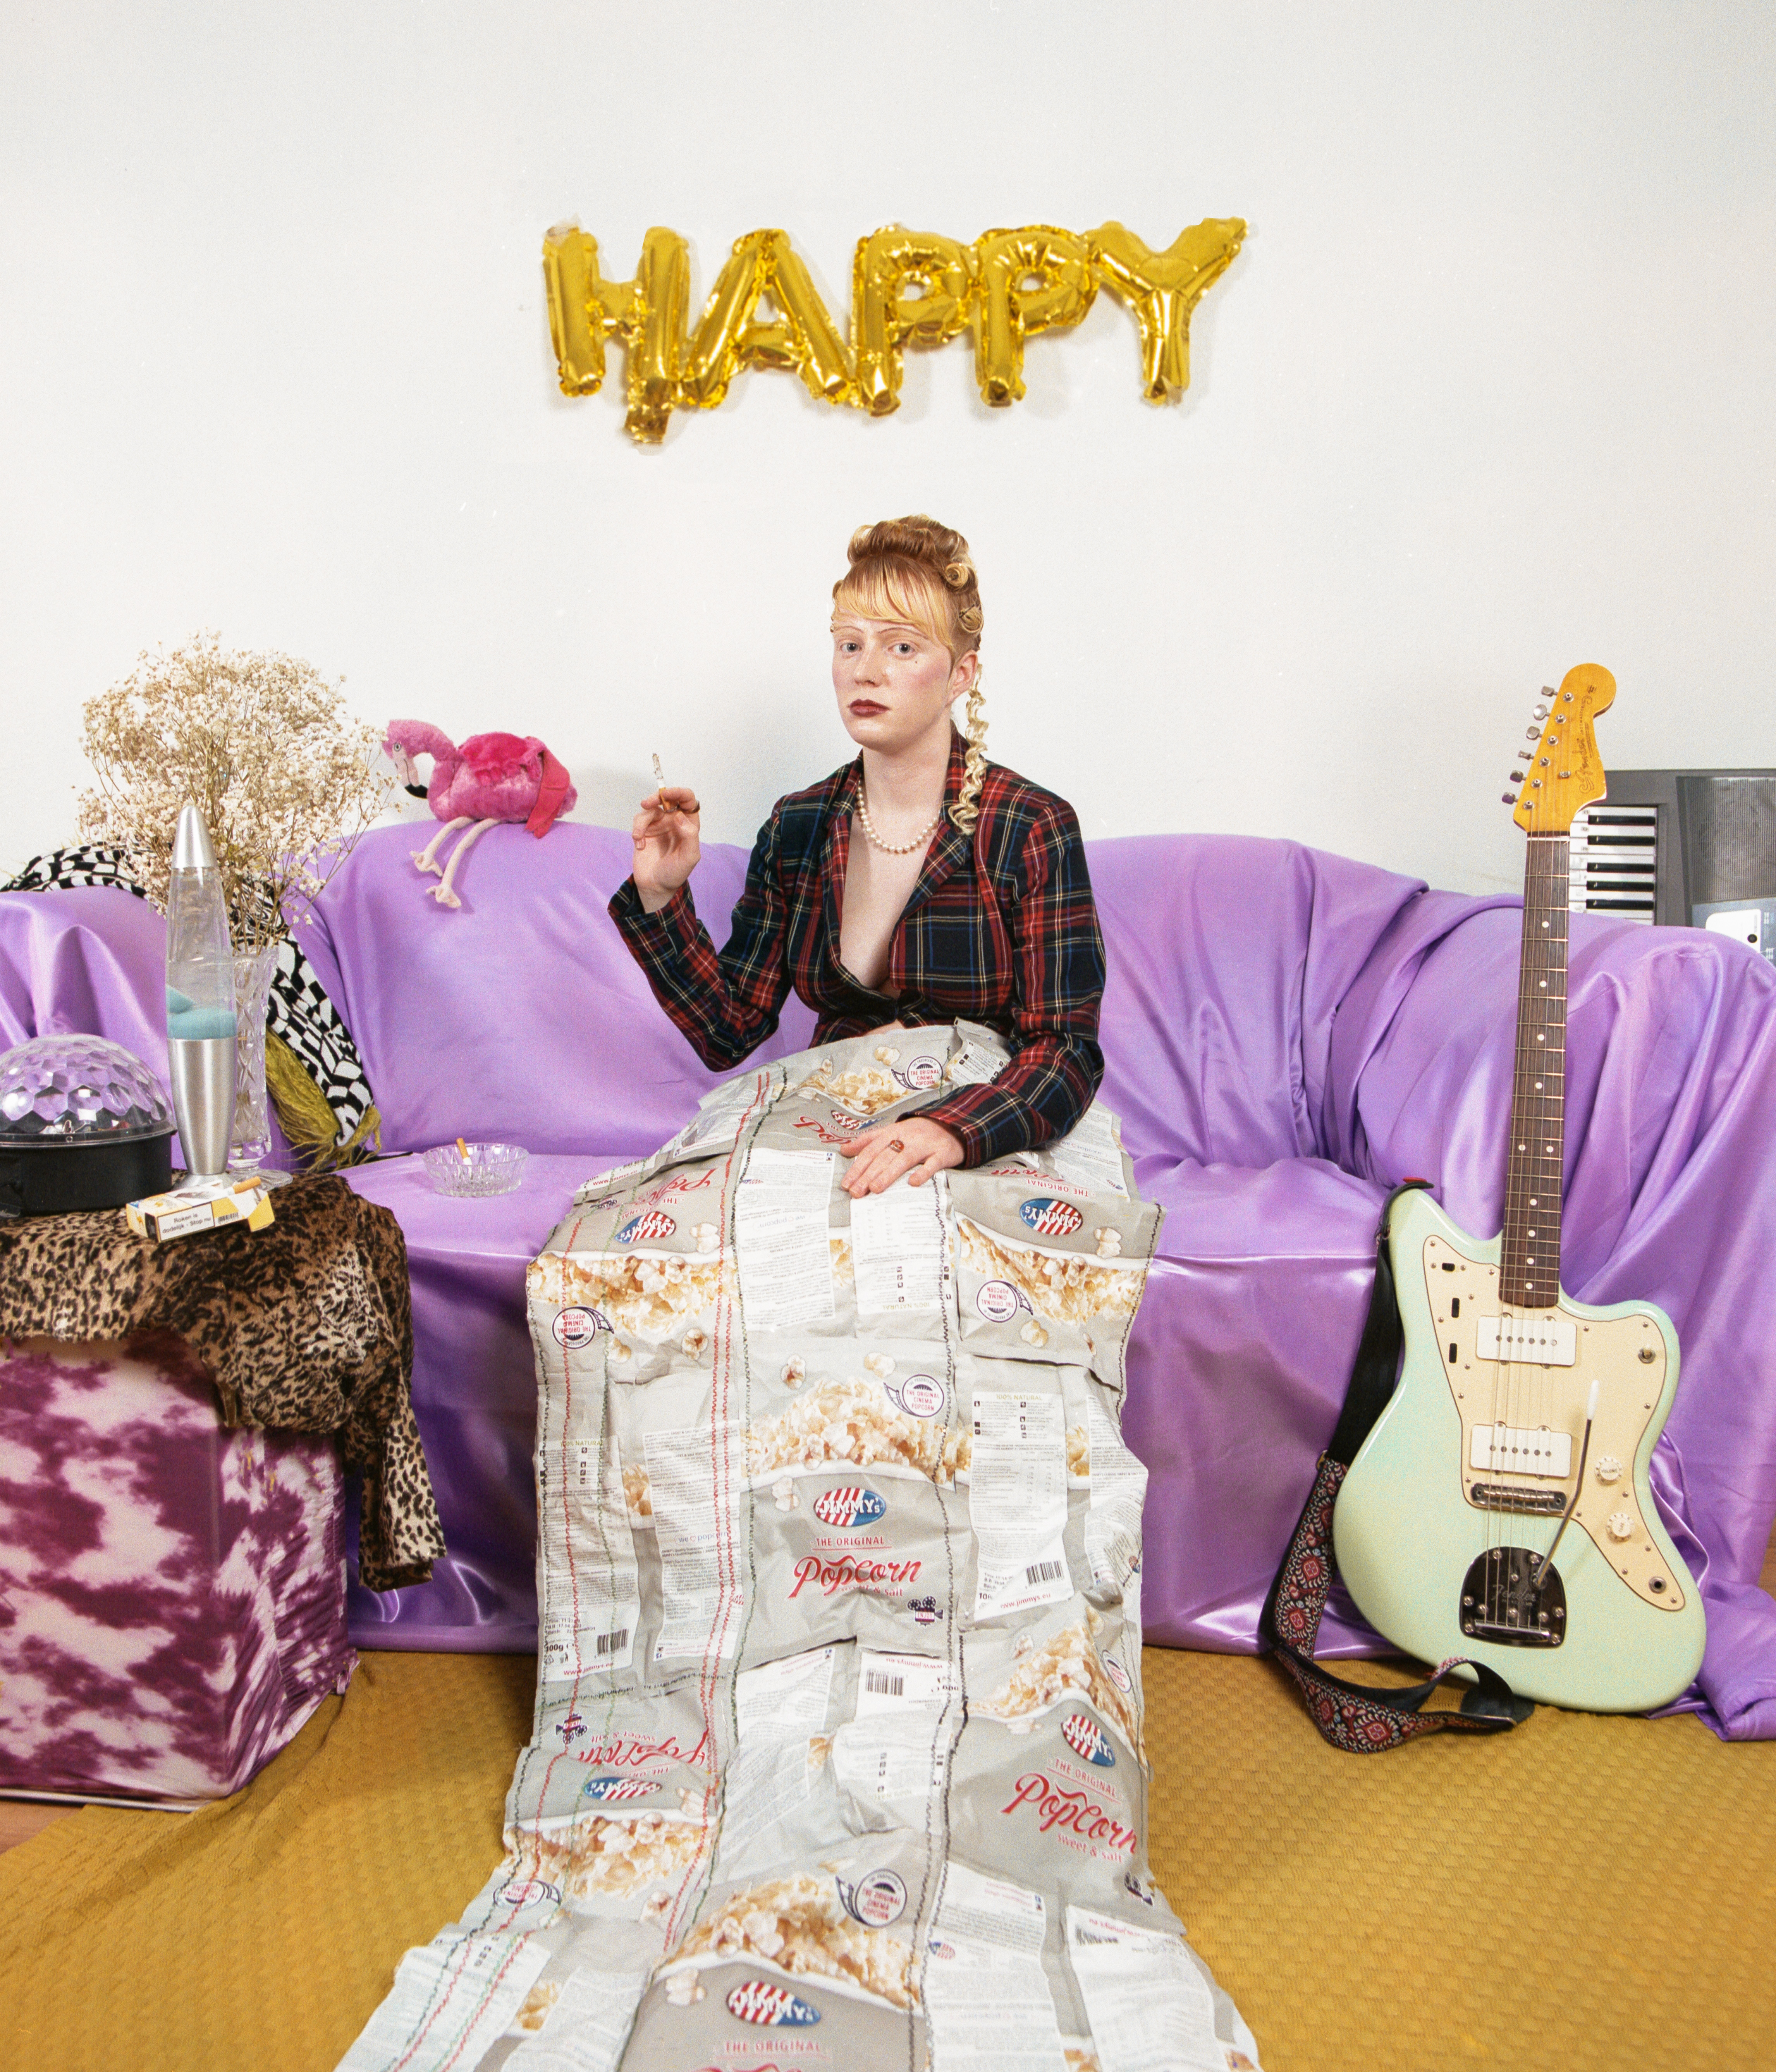 Flo Verhulst – young person in pijamas and an elaborate hairdo, sitting on a purple couch with various objects, smoking a cigarette and looking deadpan at camera